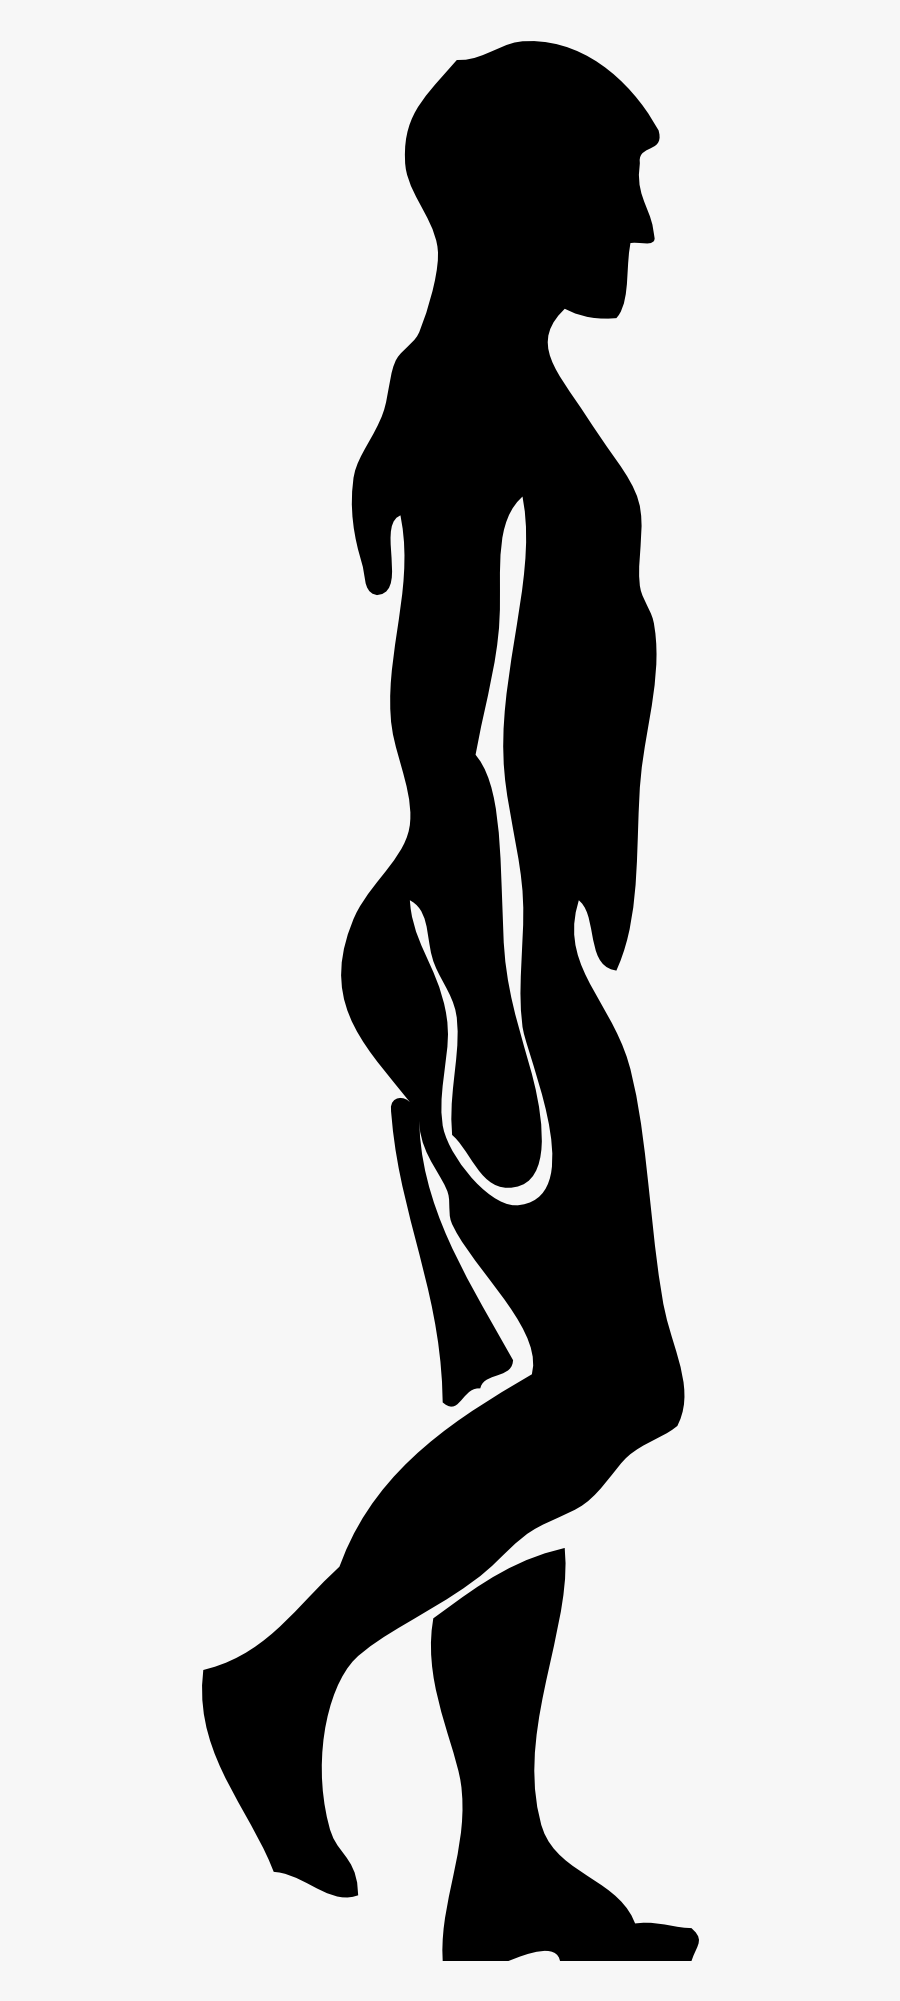 Walking Silhouette Gif Png, Transparent Clipart